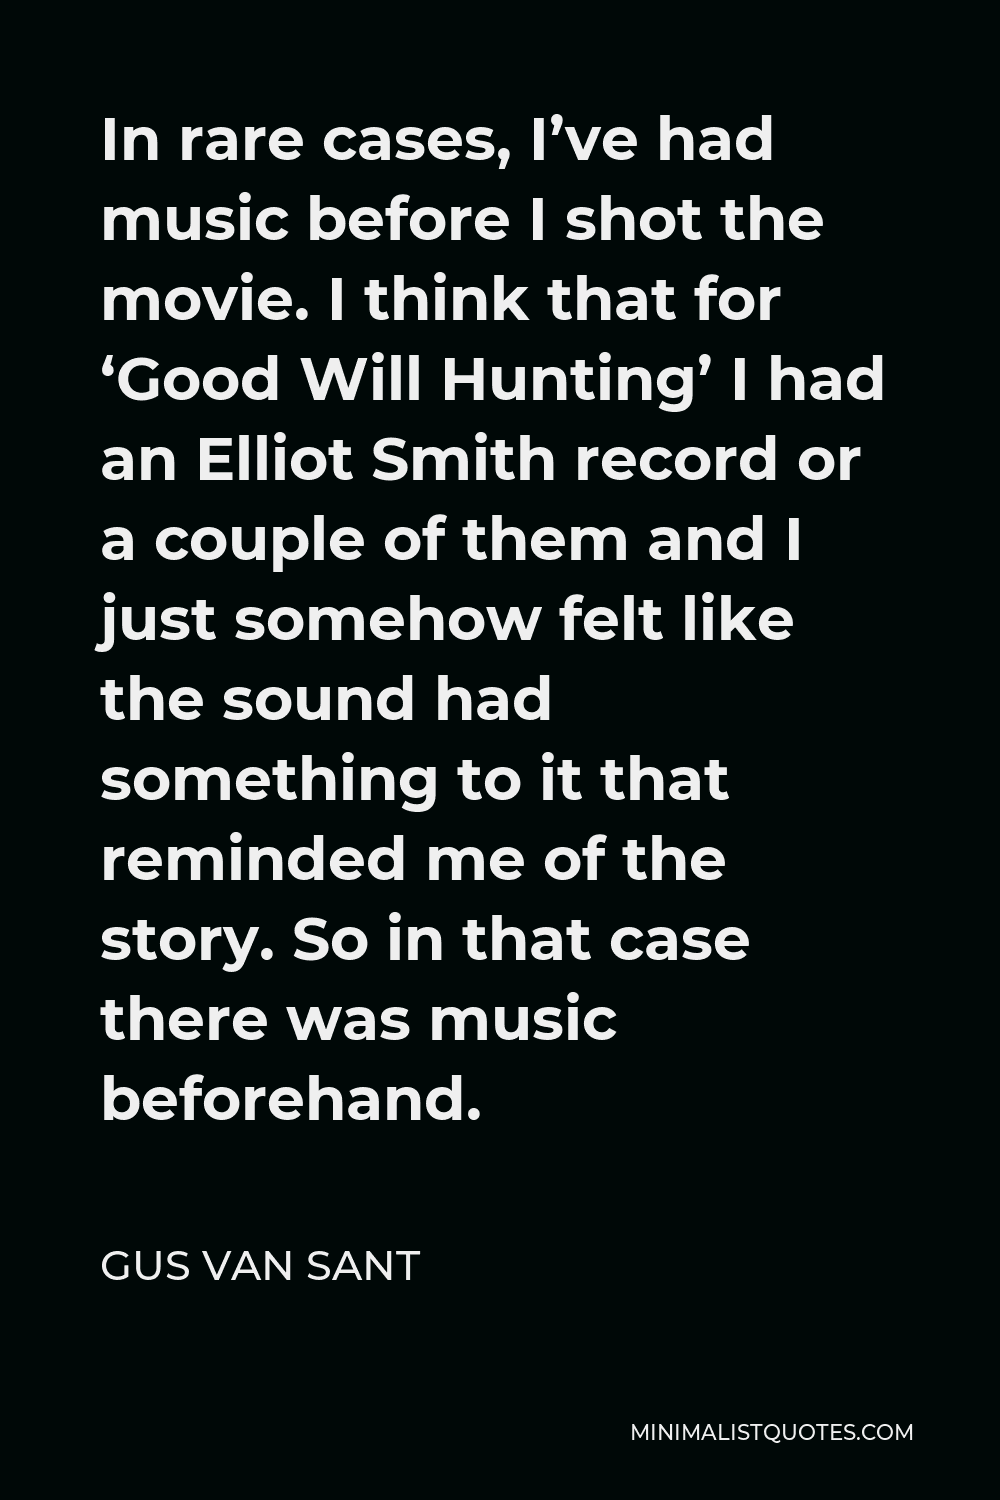 Gus Van Sant Quote - In rare cases, I’ve had music before I shot the movie. I think that for ‘Good Will Hunting’ I had an Elliot Smith record or a couple of them and I just somehow felt like the sound had something to it that reminded me of the story. So in that case there was music beforehand.